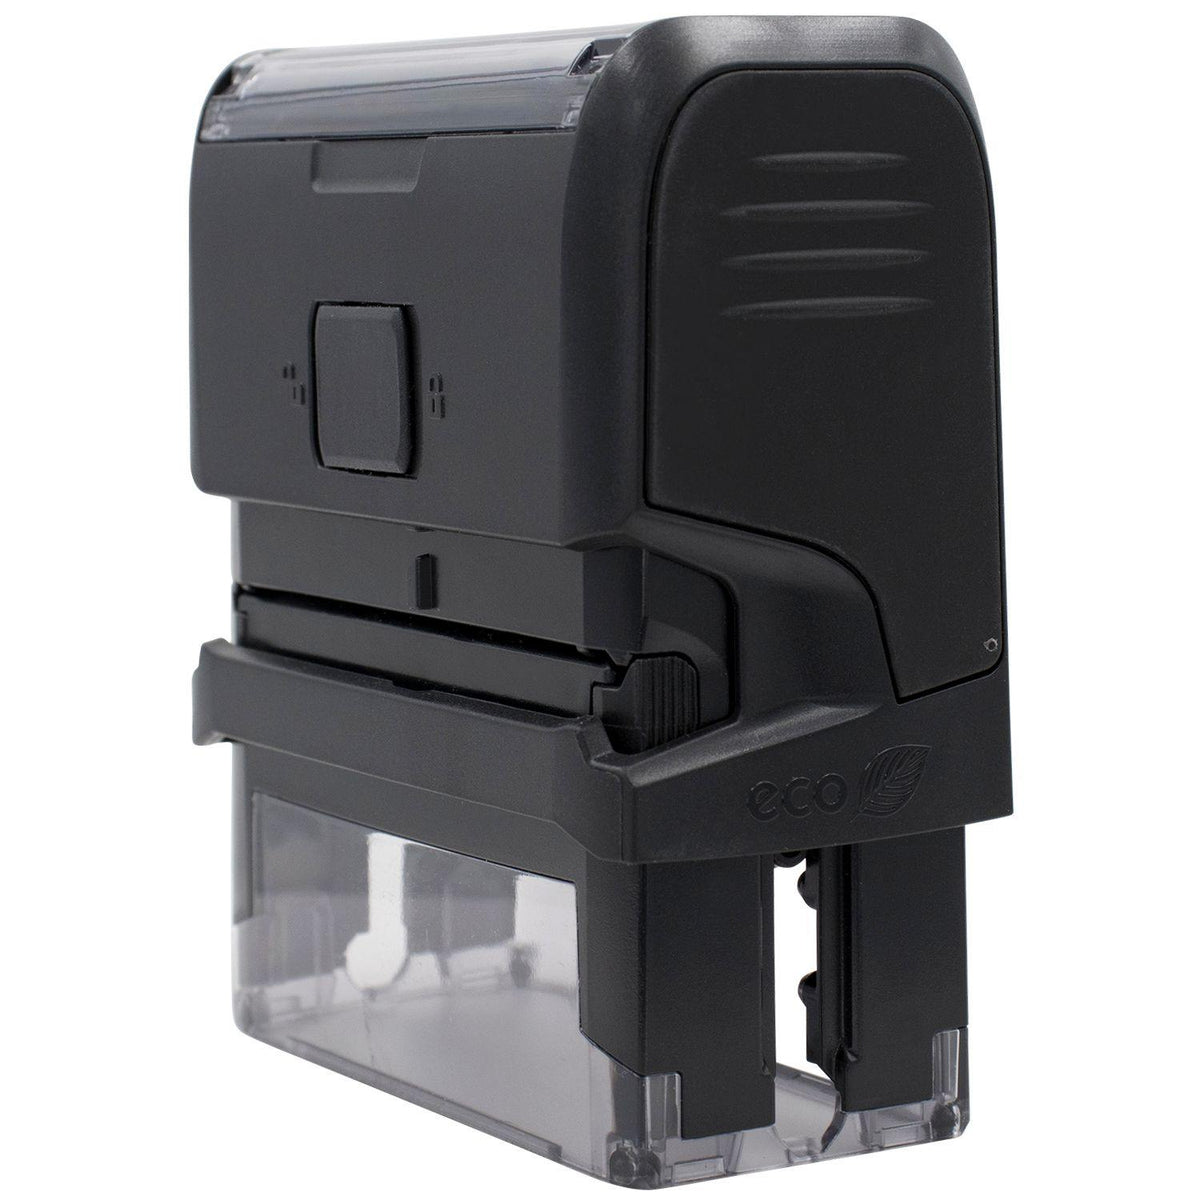 Side View of Large Self-Inking Bold Rough Draft Stamp at an Angle